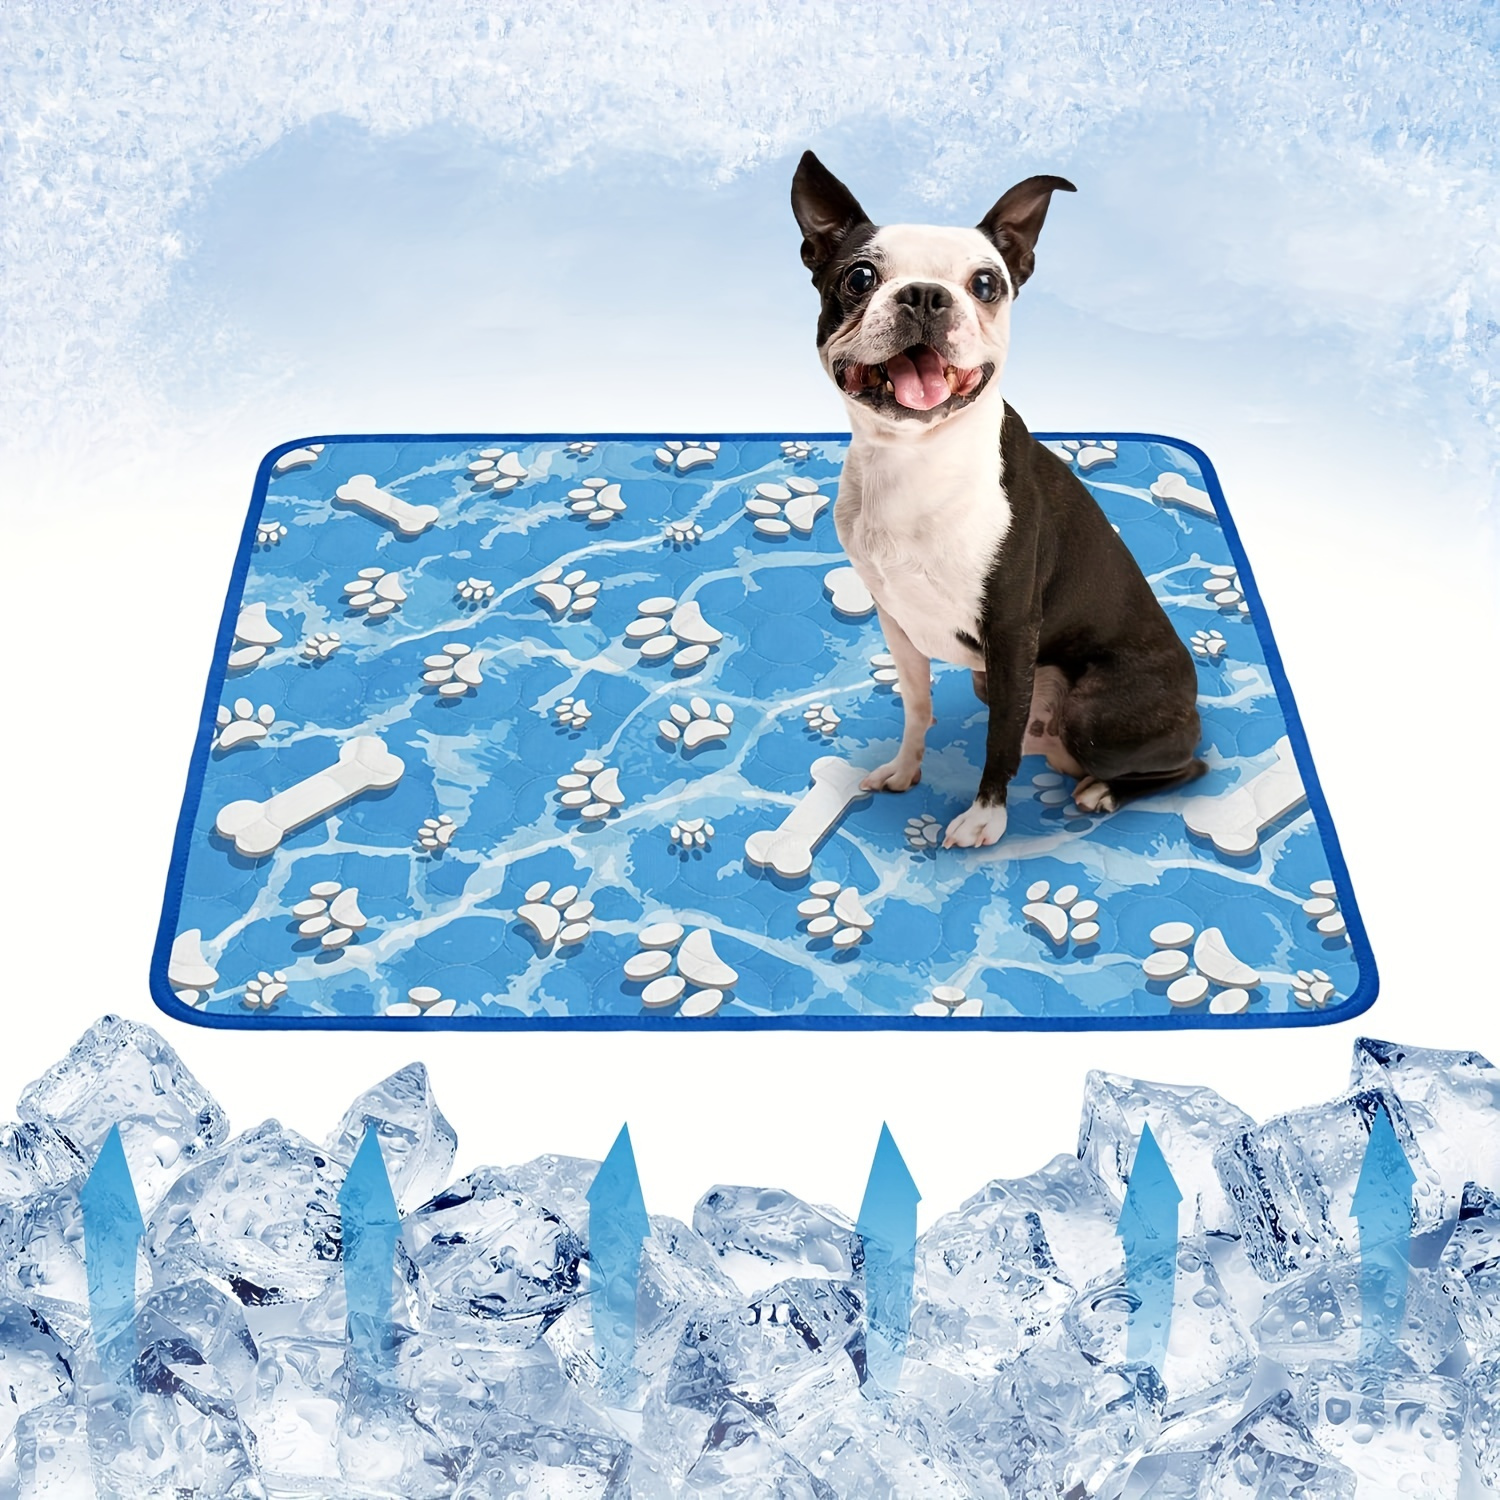 

Luxury Dog Cooling Mat: Instant Comfort, Ice Silk Surface, Washable, Suitable For Beds, Kennels, Car Seats, Cats & Dogs - Summer Essential